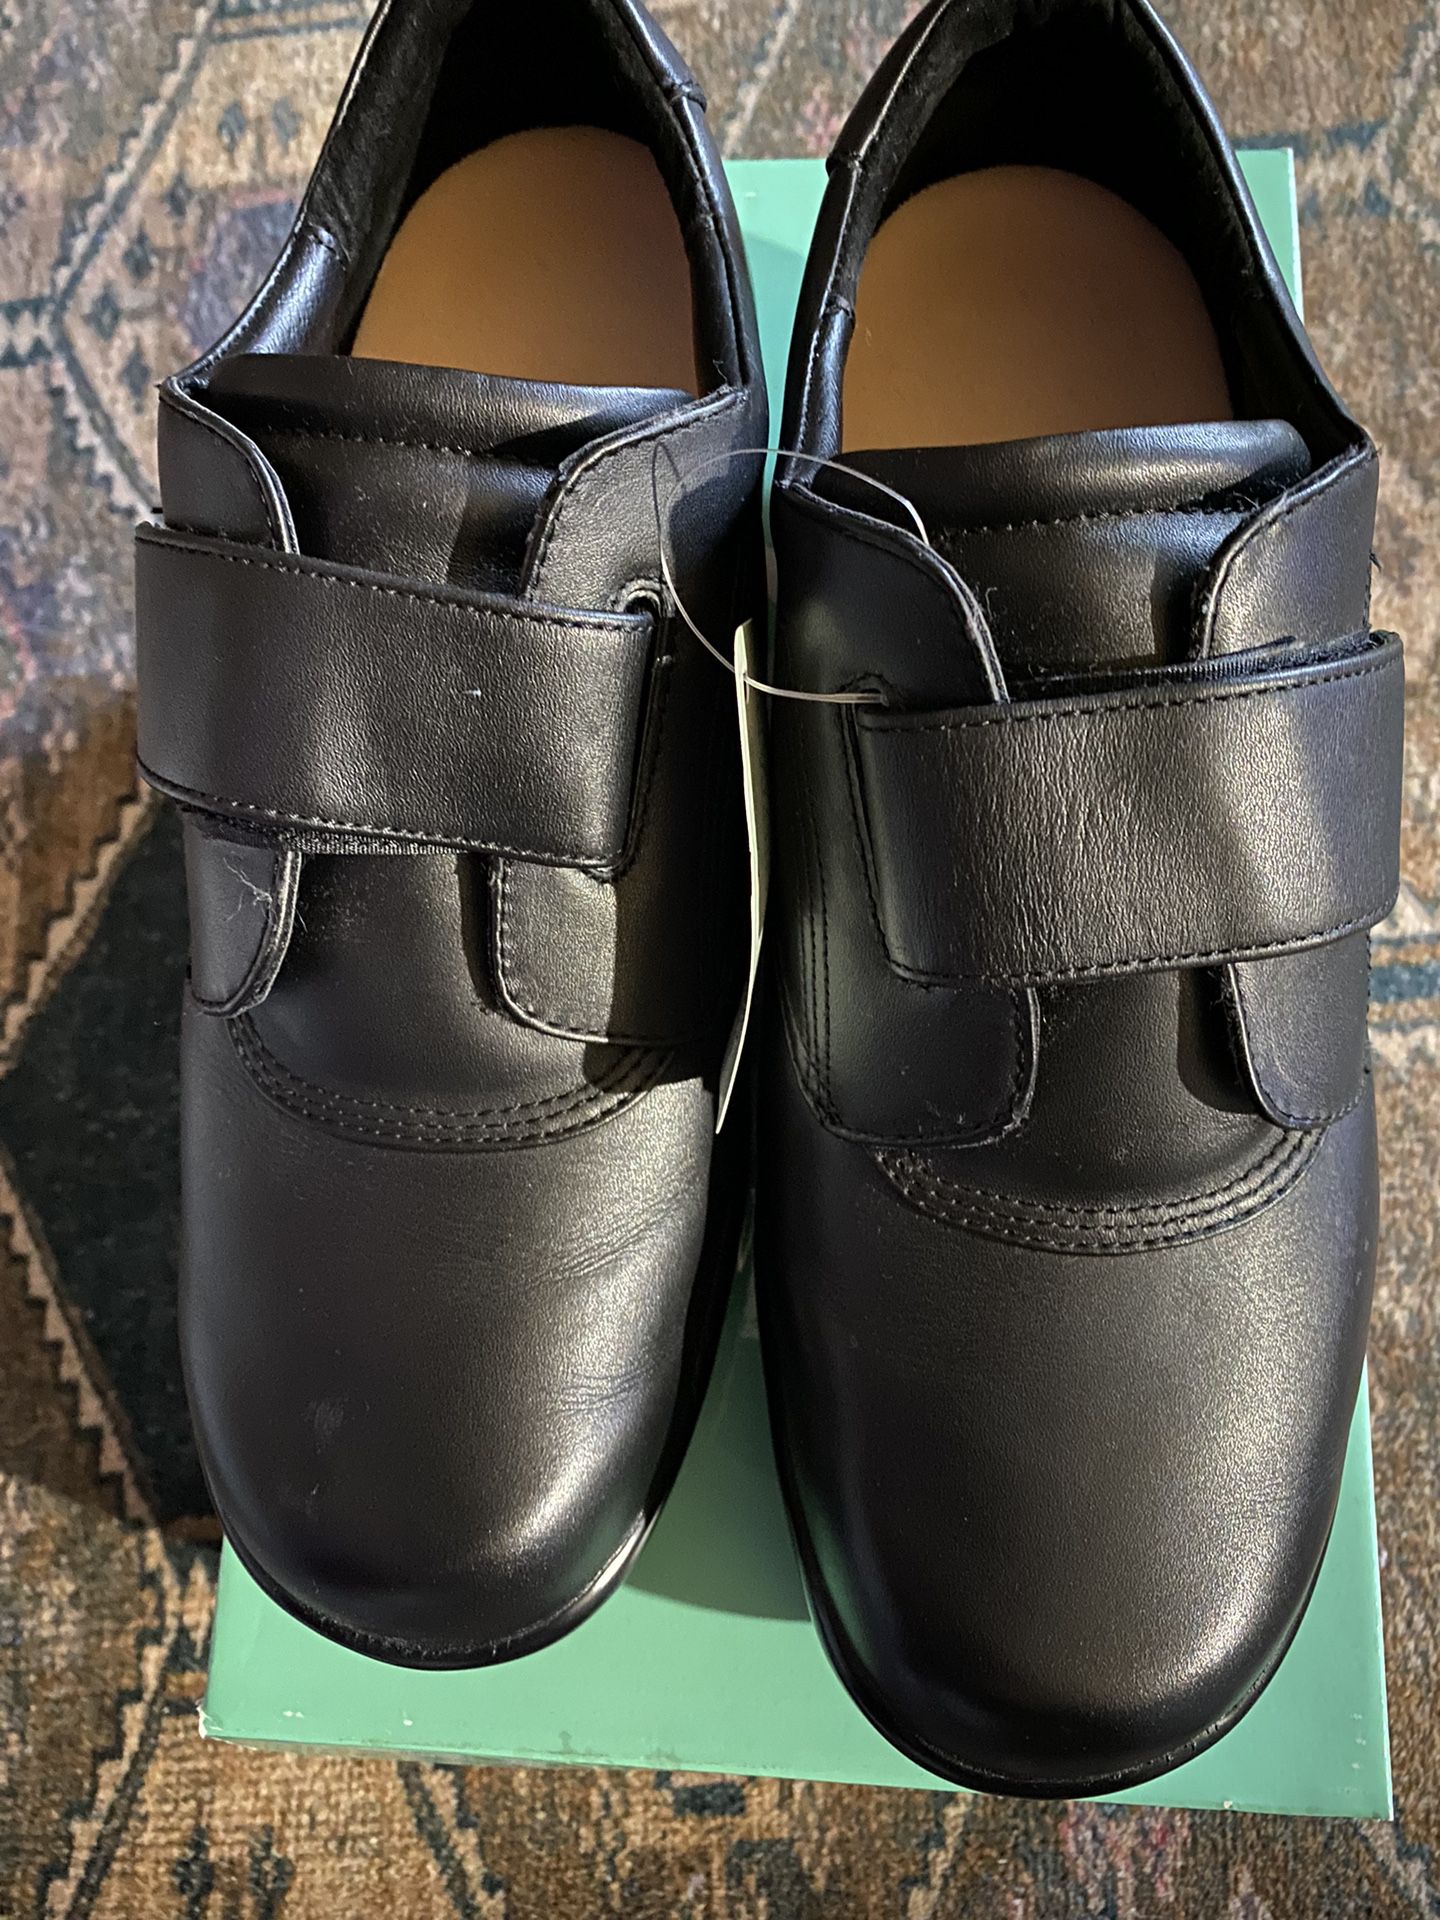 Black Leather Shoes 